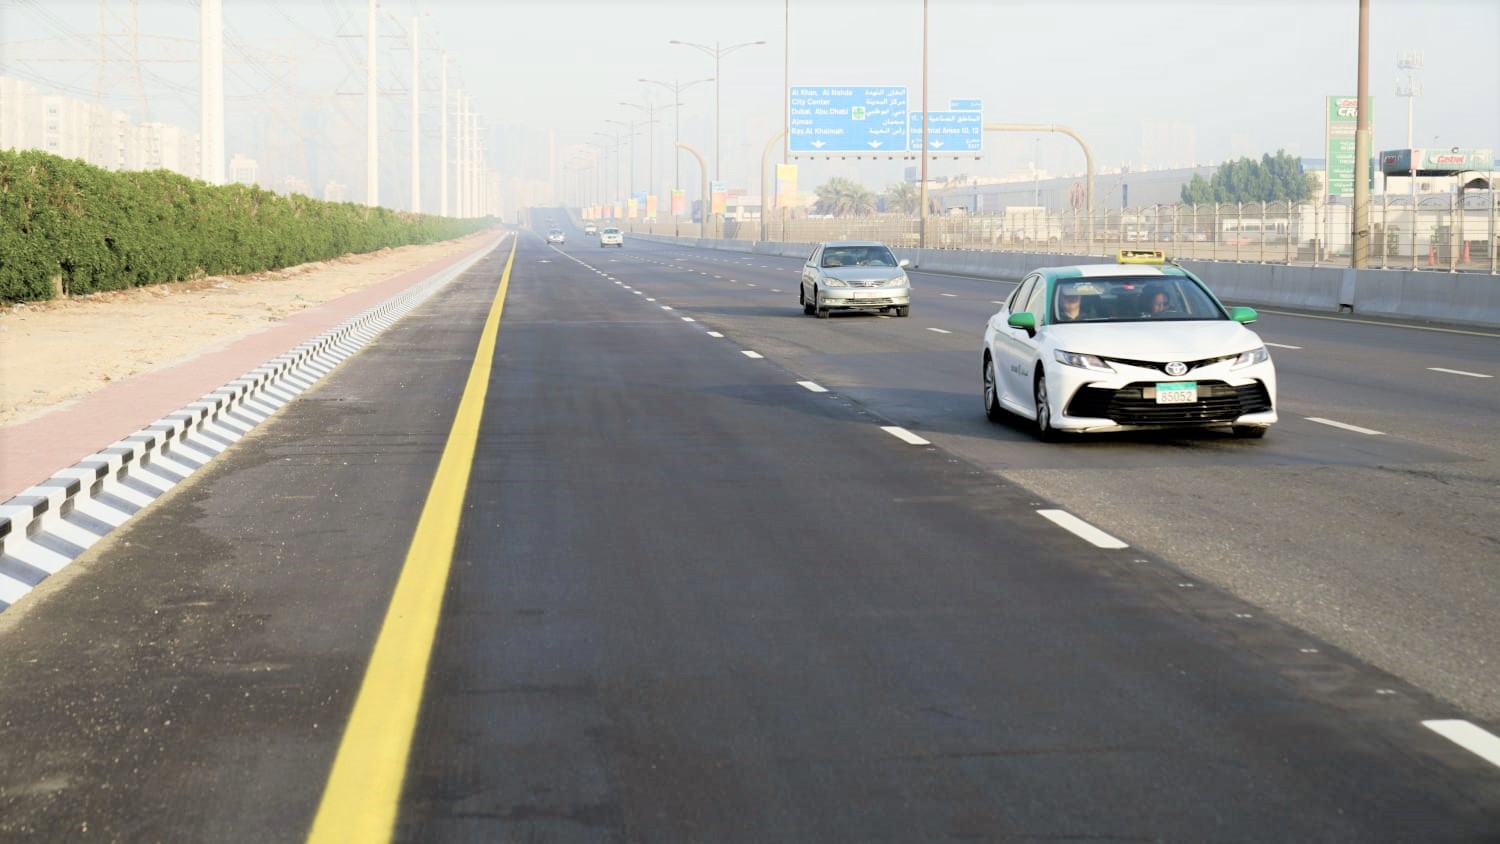 Developing the Sharjah Ring Road by Initiating New Pathways